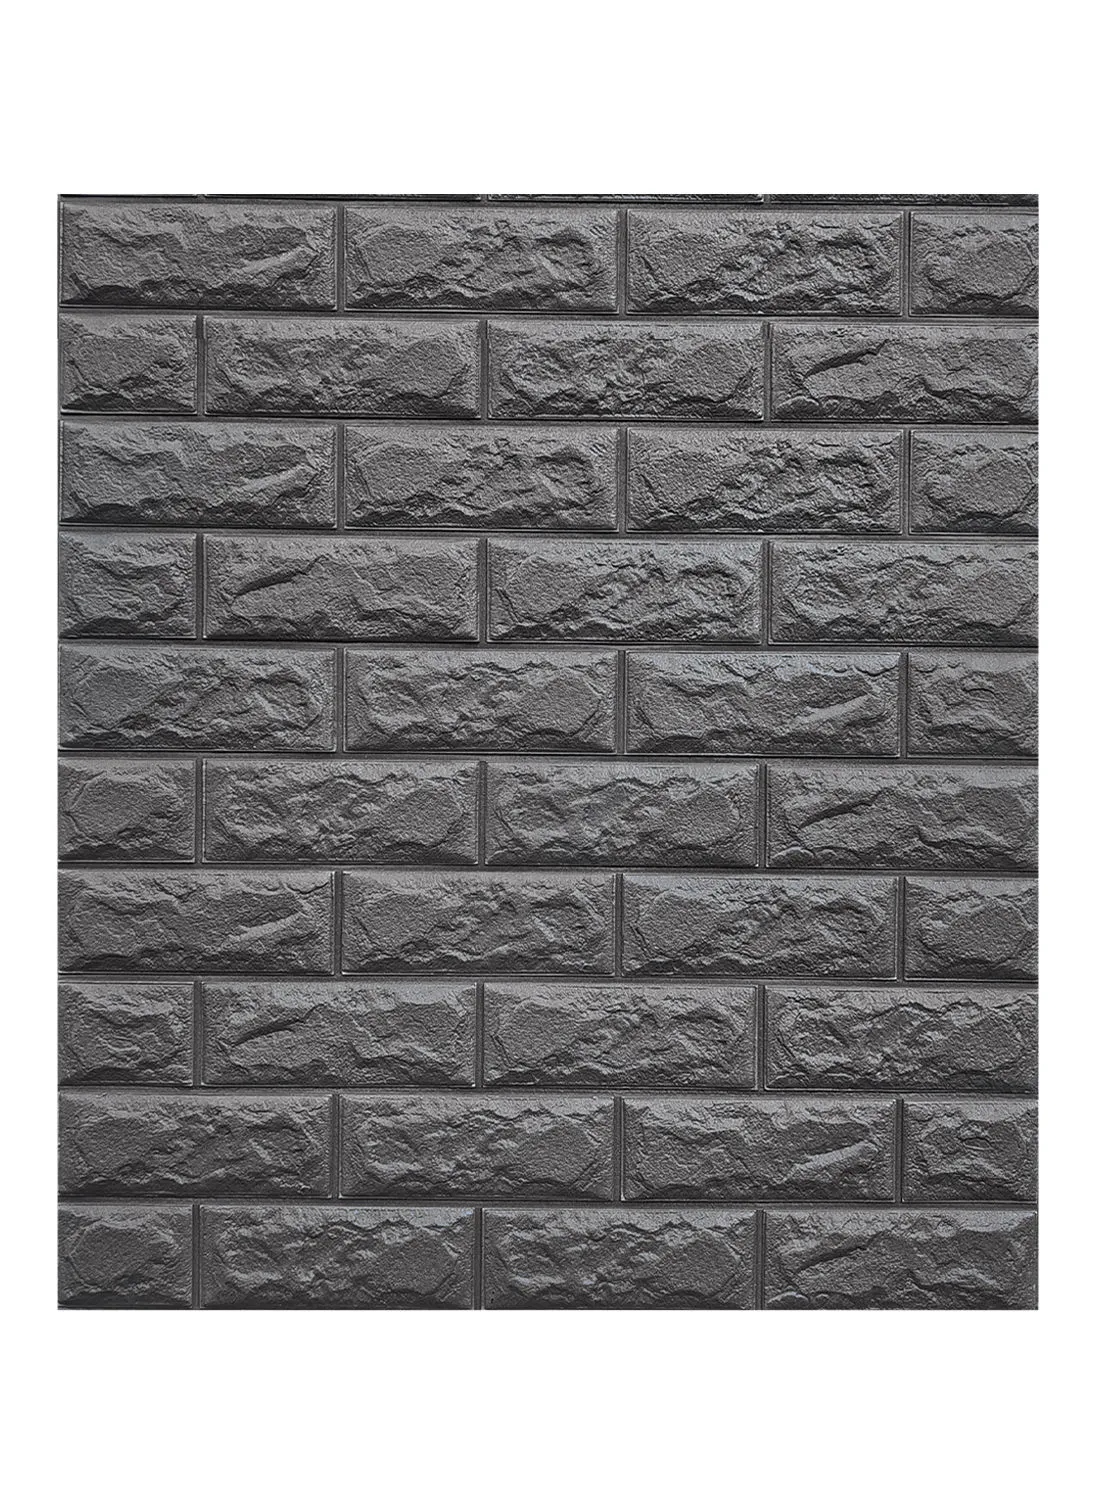 Switch Self Adhesive 3D Foam Set Of 10 Wallpaper Premium Quality For Home Office Restaurant Self Install Dark Grey